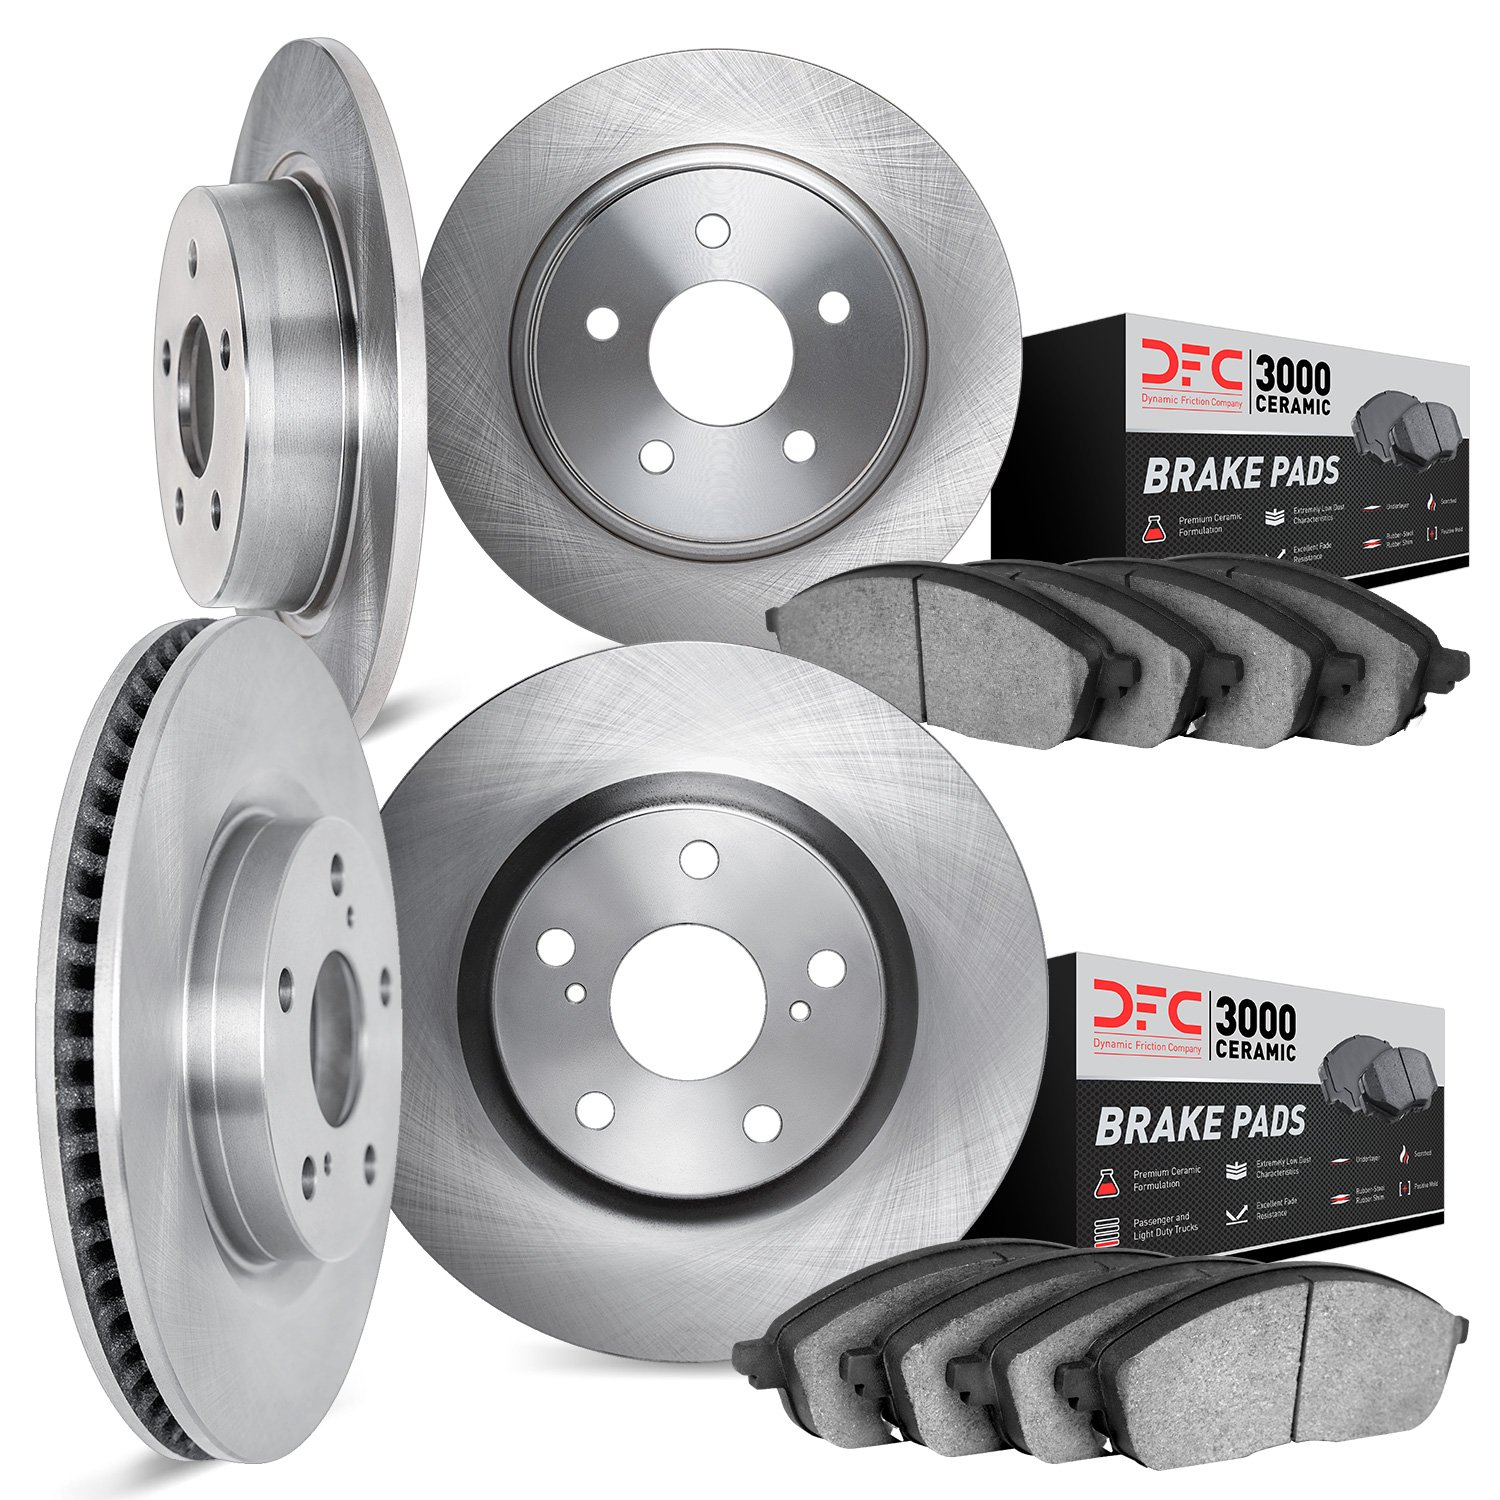 6304-76052 Brake Rotors with 3000-Series Ceramic Brake Pads Kit, 2003-2006 Lexus/Toyota/Scion, Position: Front and Rear